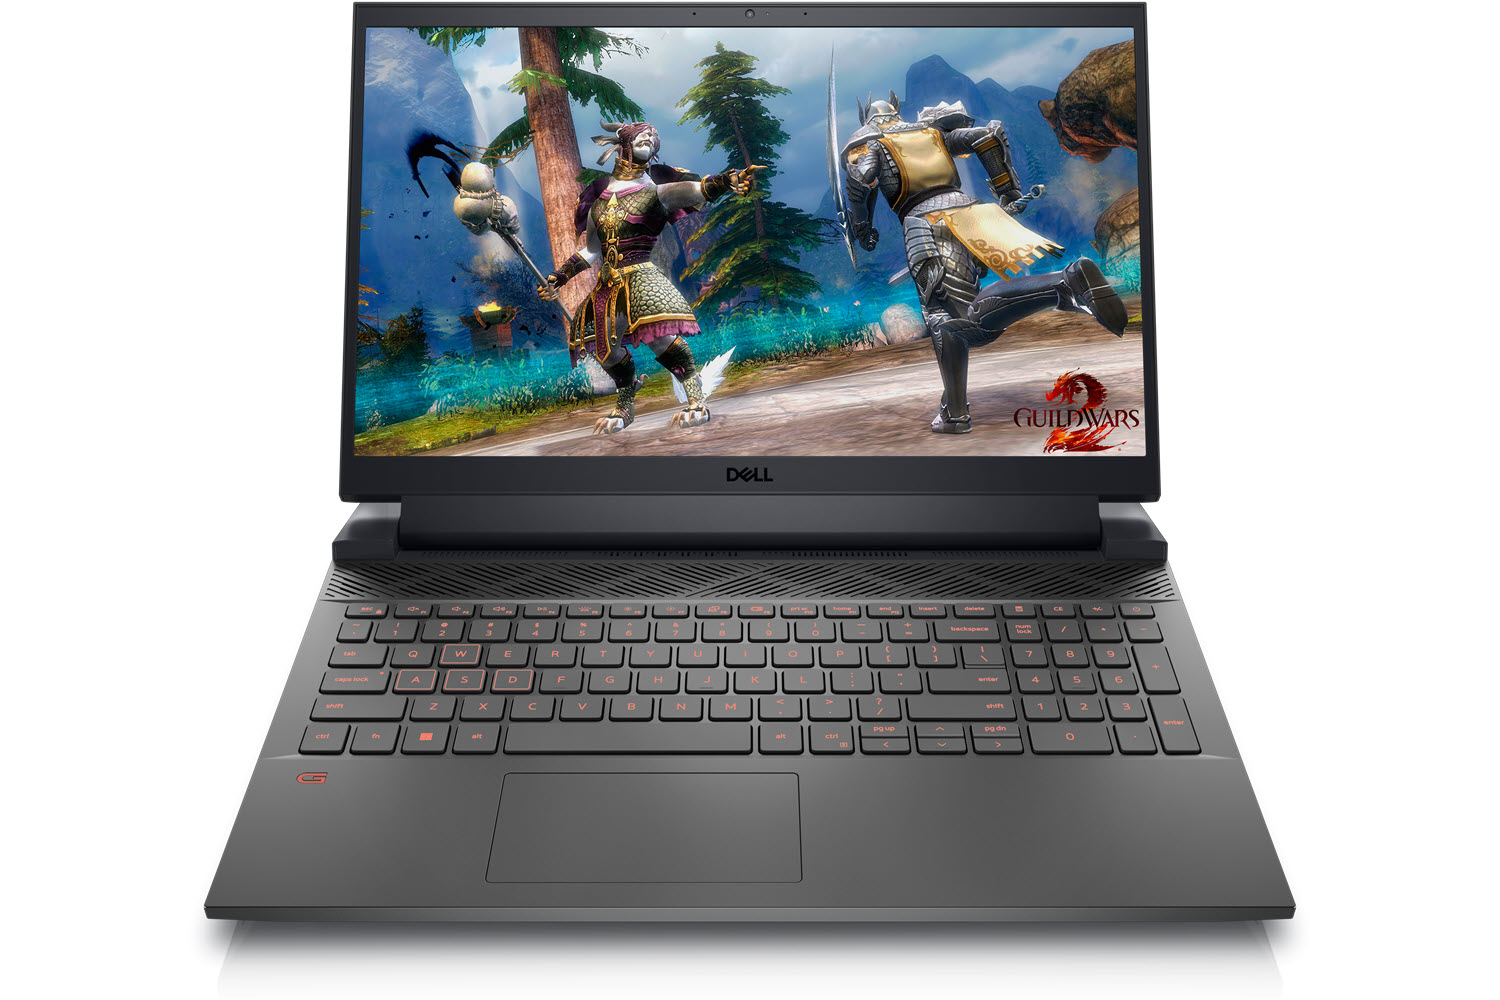 This Dell gaming laptop is $350 off for Black Friday – now $600